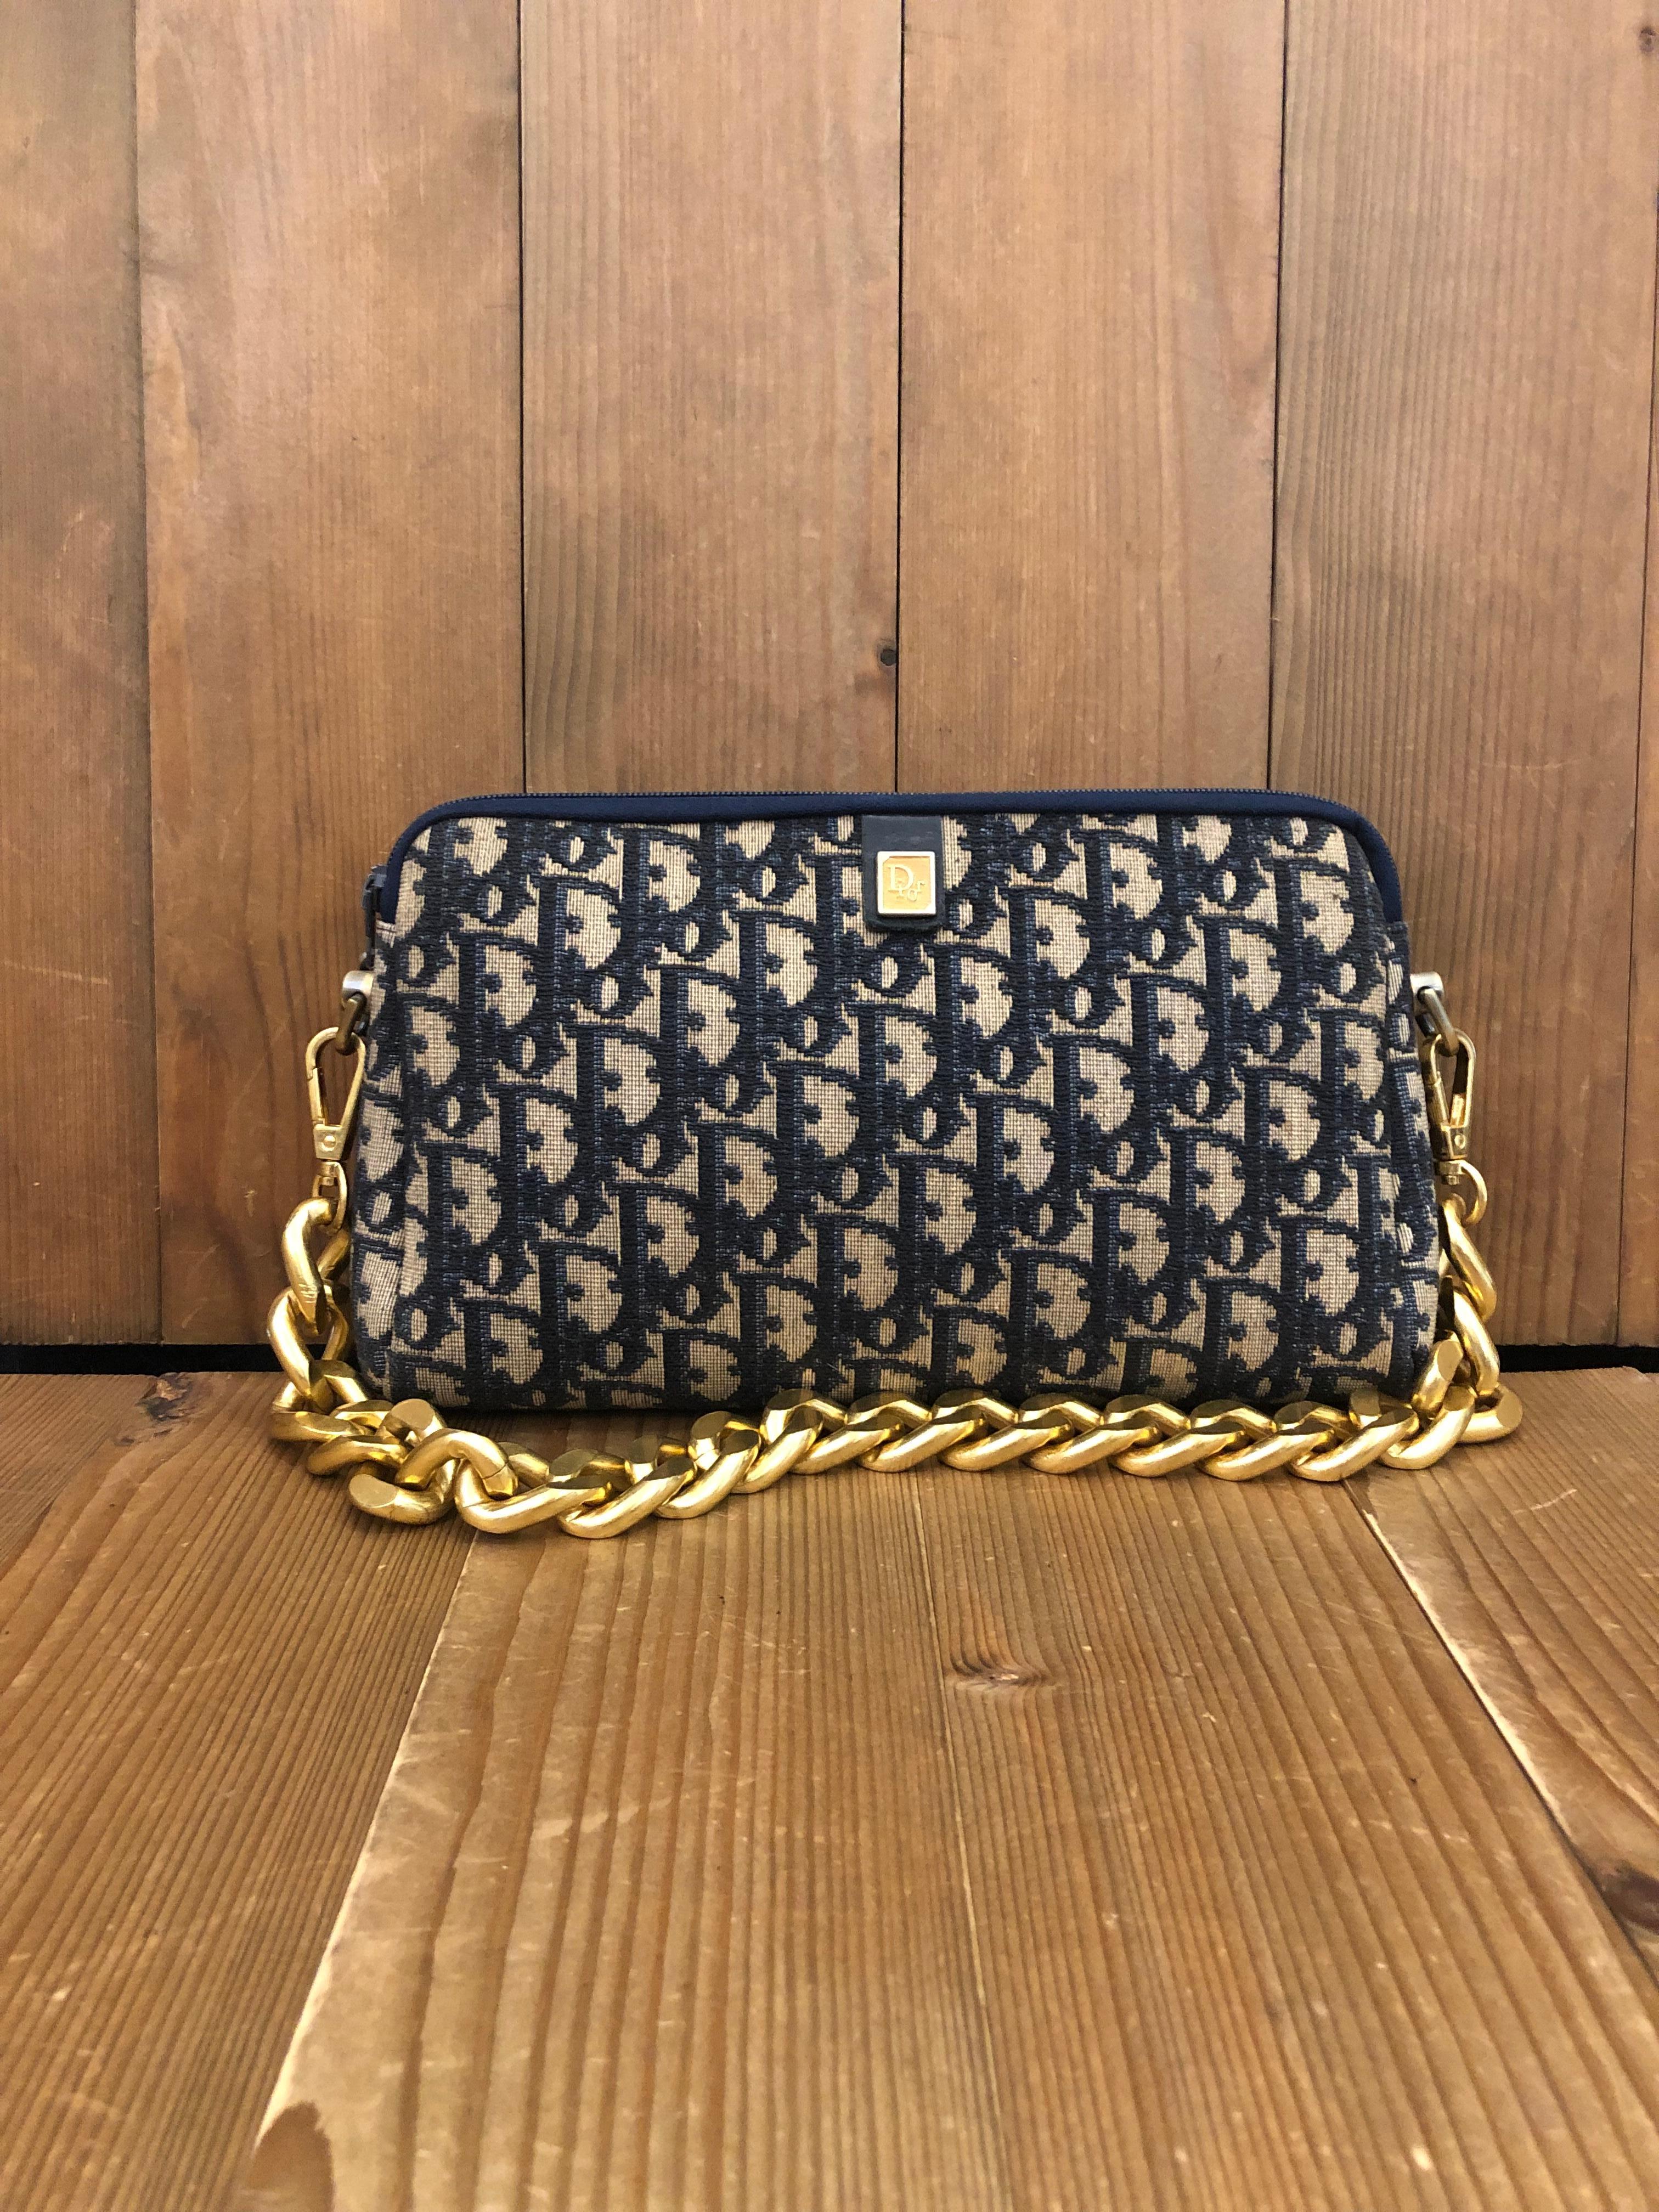 Vintage CHRISTIAN DIOR Clutch bag in navy Trotter jacquard with leather interior. Medium in size which fits plus-sized cell phone and other small accessories. Made in France. Measures approximately 9.5 x 6 x 1.75 inches. Third party non-Dior parts